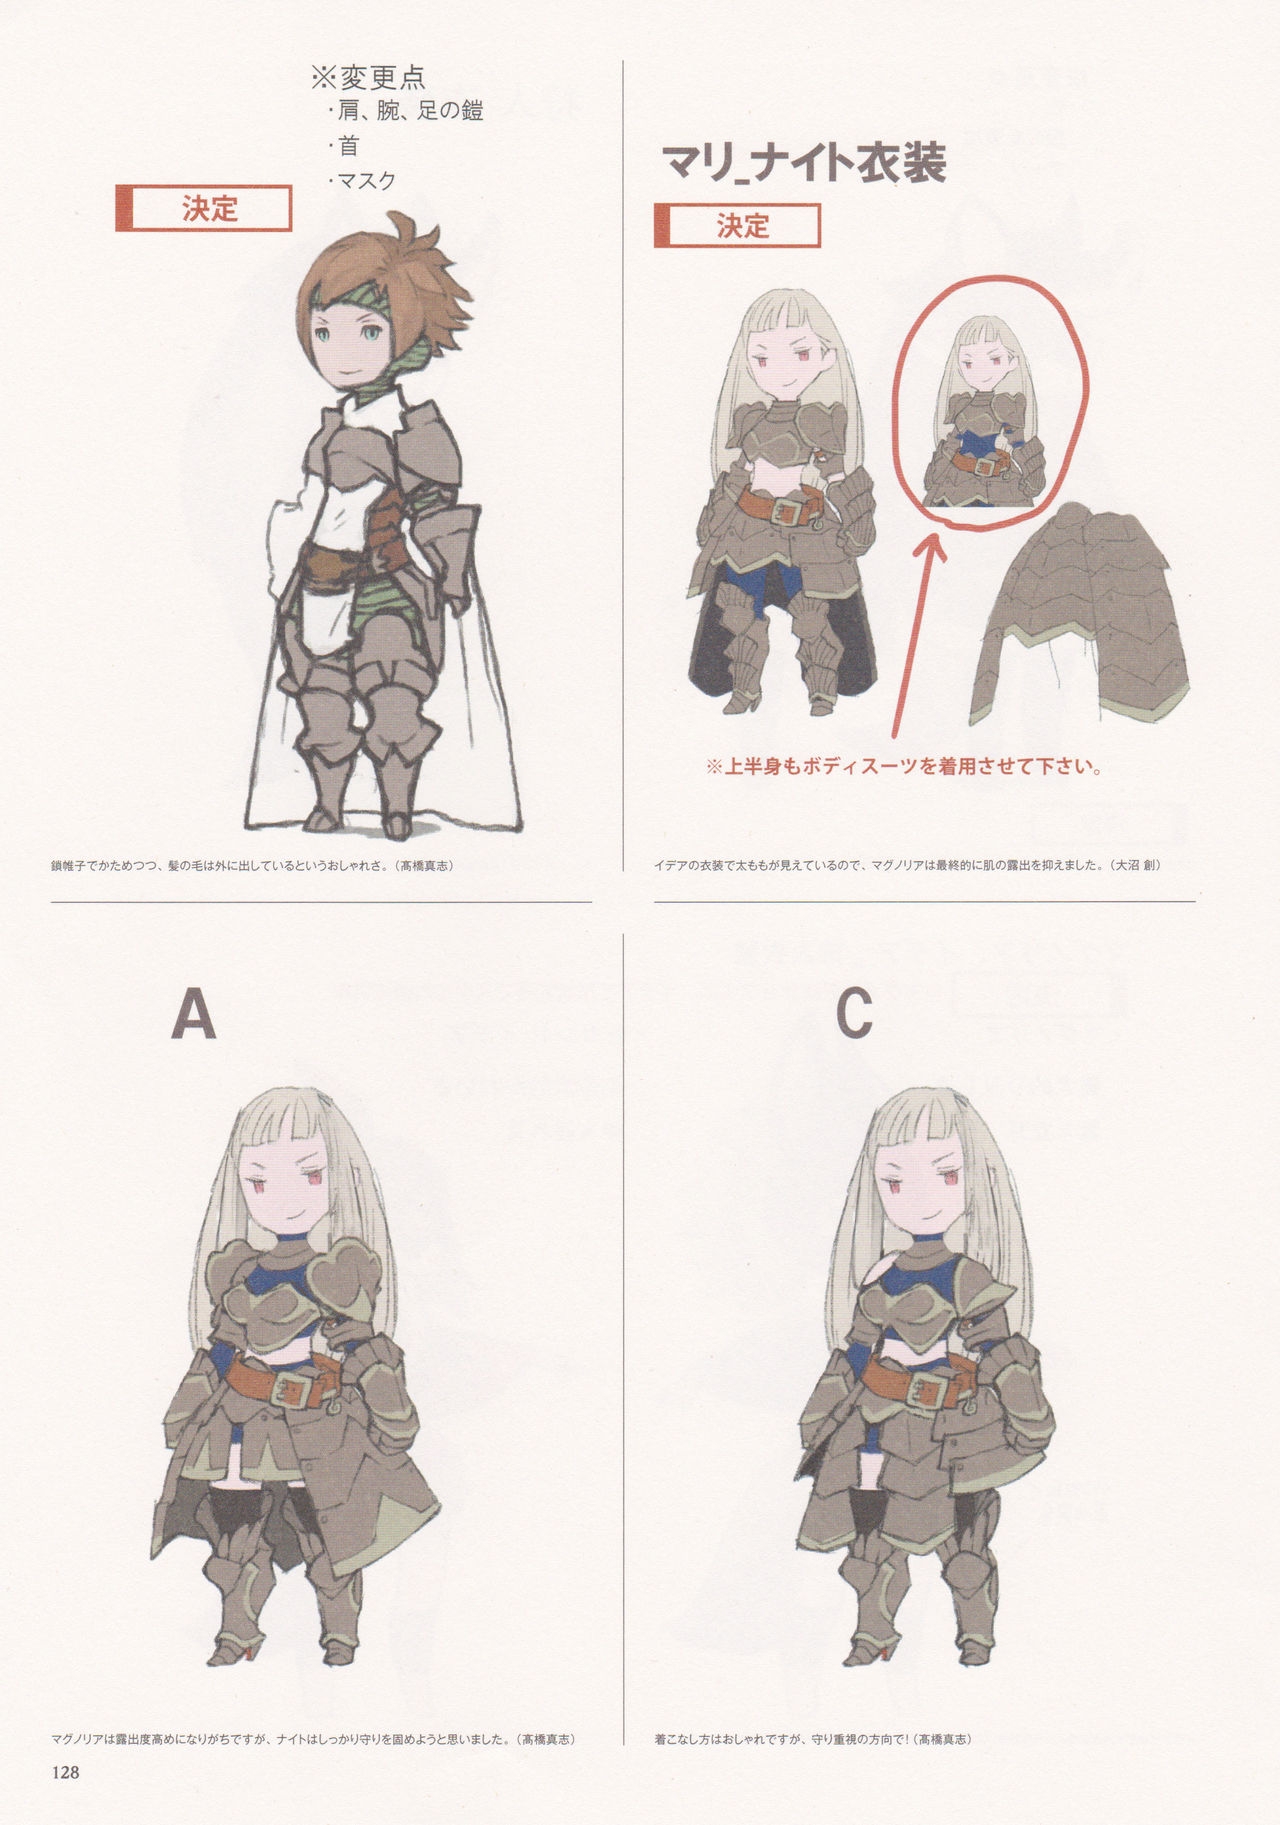 Bravely Second - End Layer - Design Works THE ART OF BRAVELY 2013-2015 128